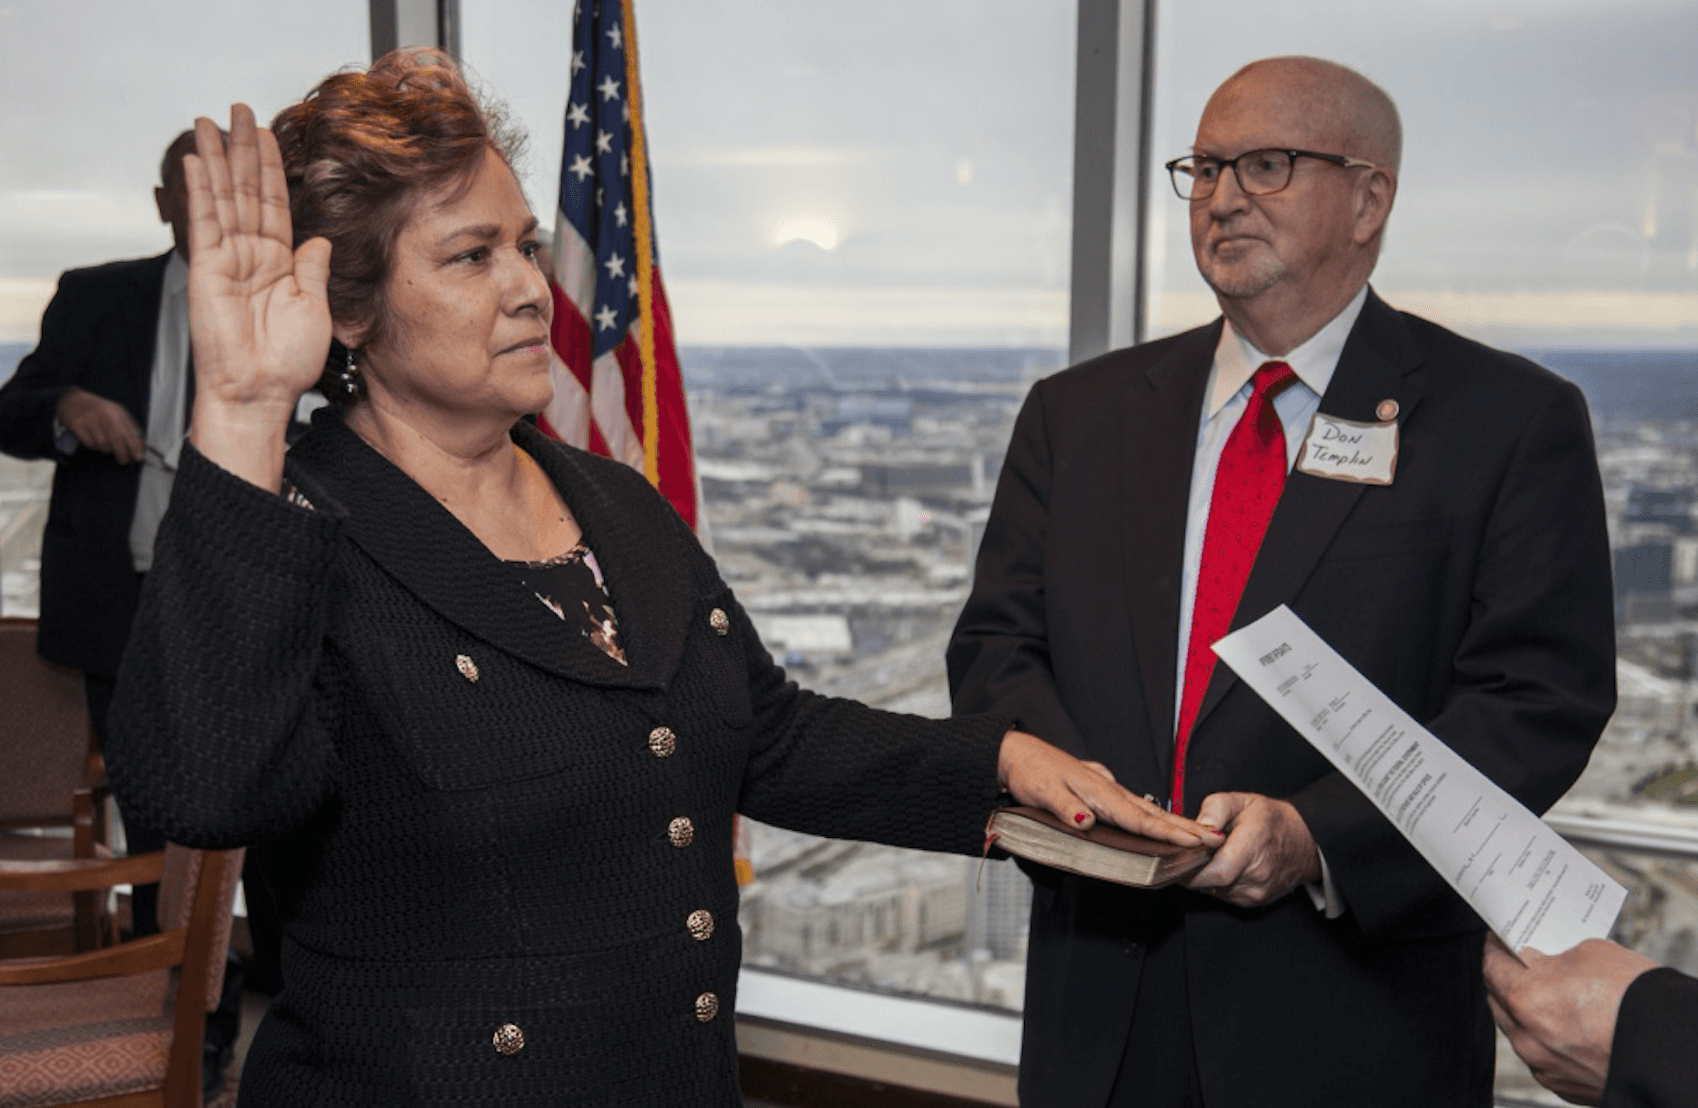 Sarah Saldaña being sworn in as the fourth director of U.S. Immigration and Customs Enforcement (ICE) in December of 2014.